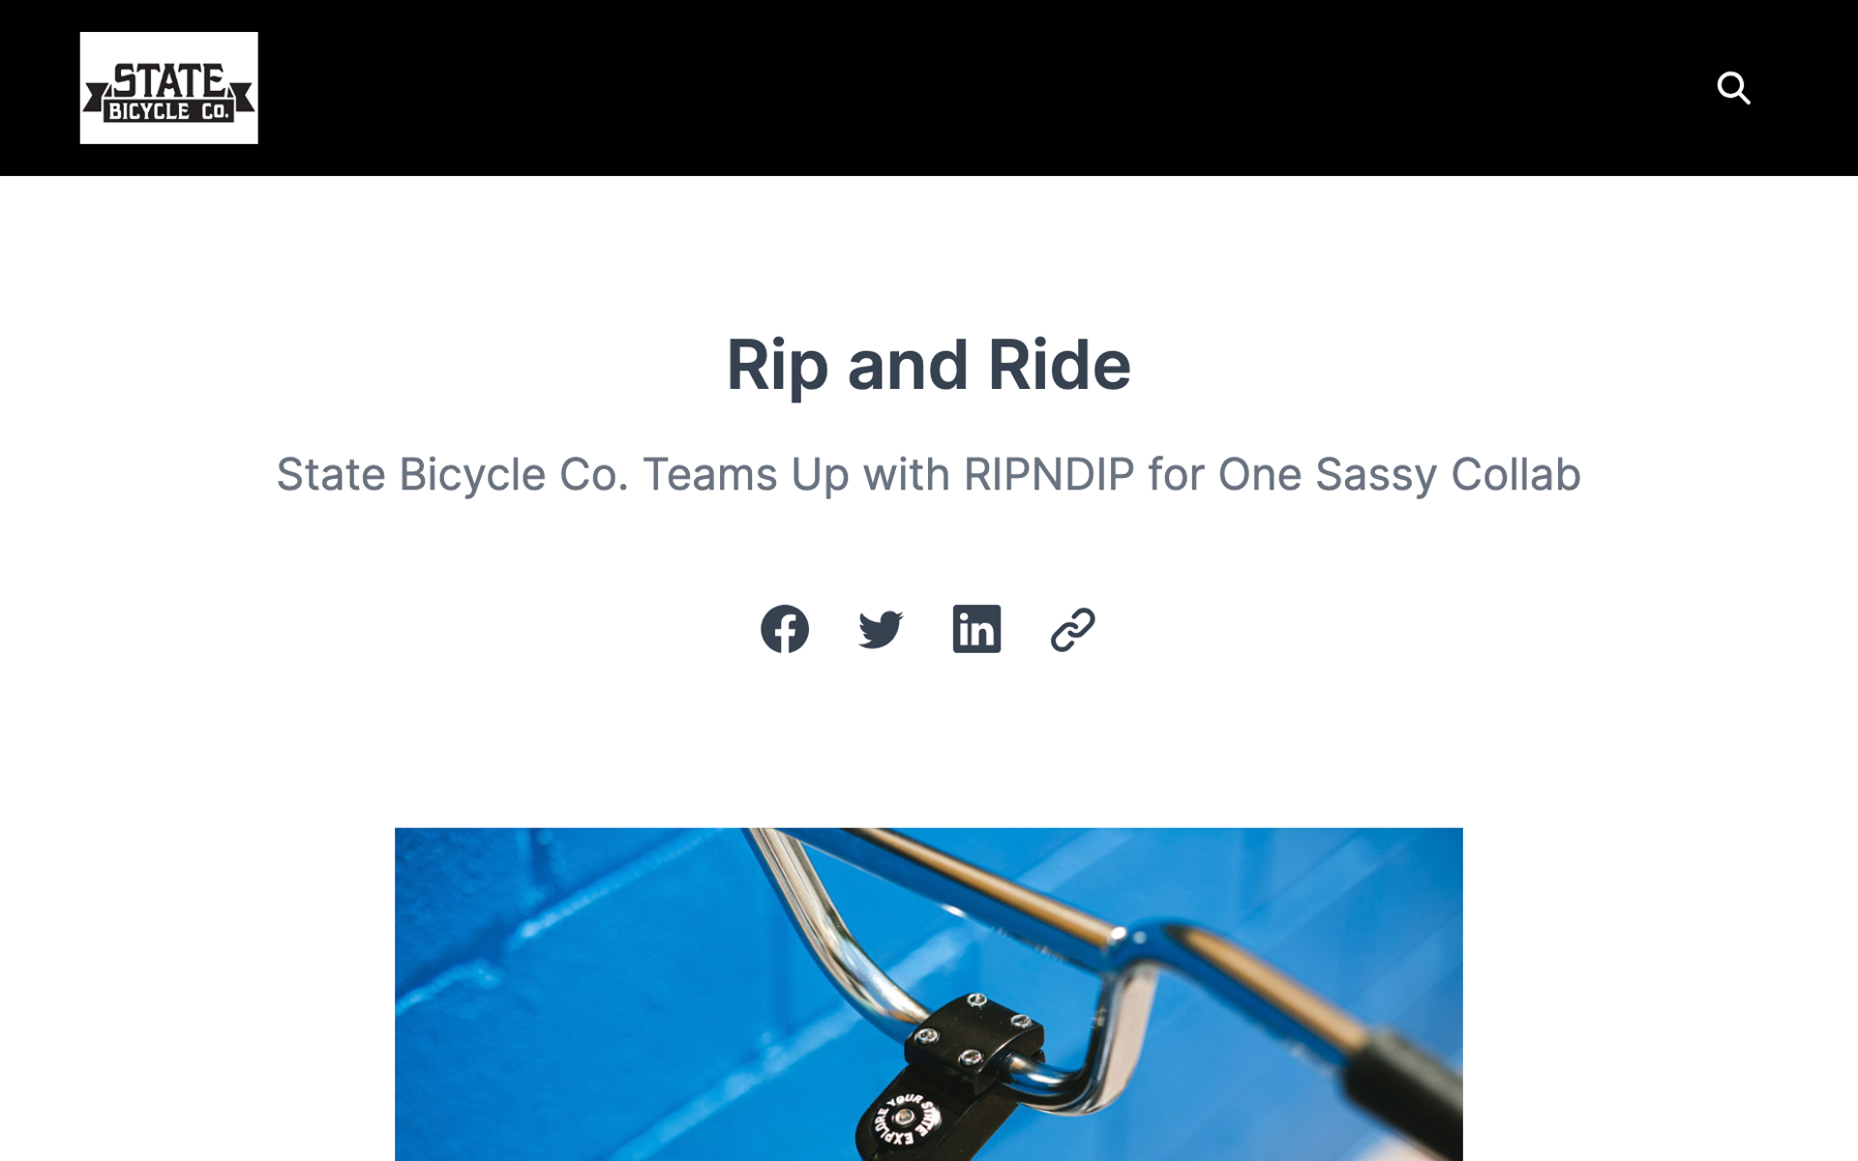 Rip and Ride